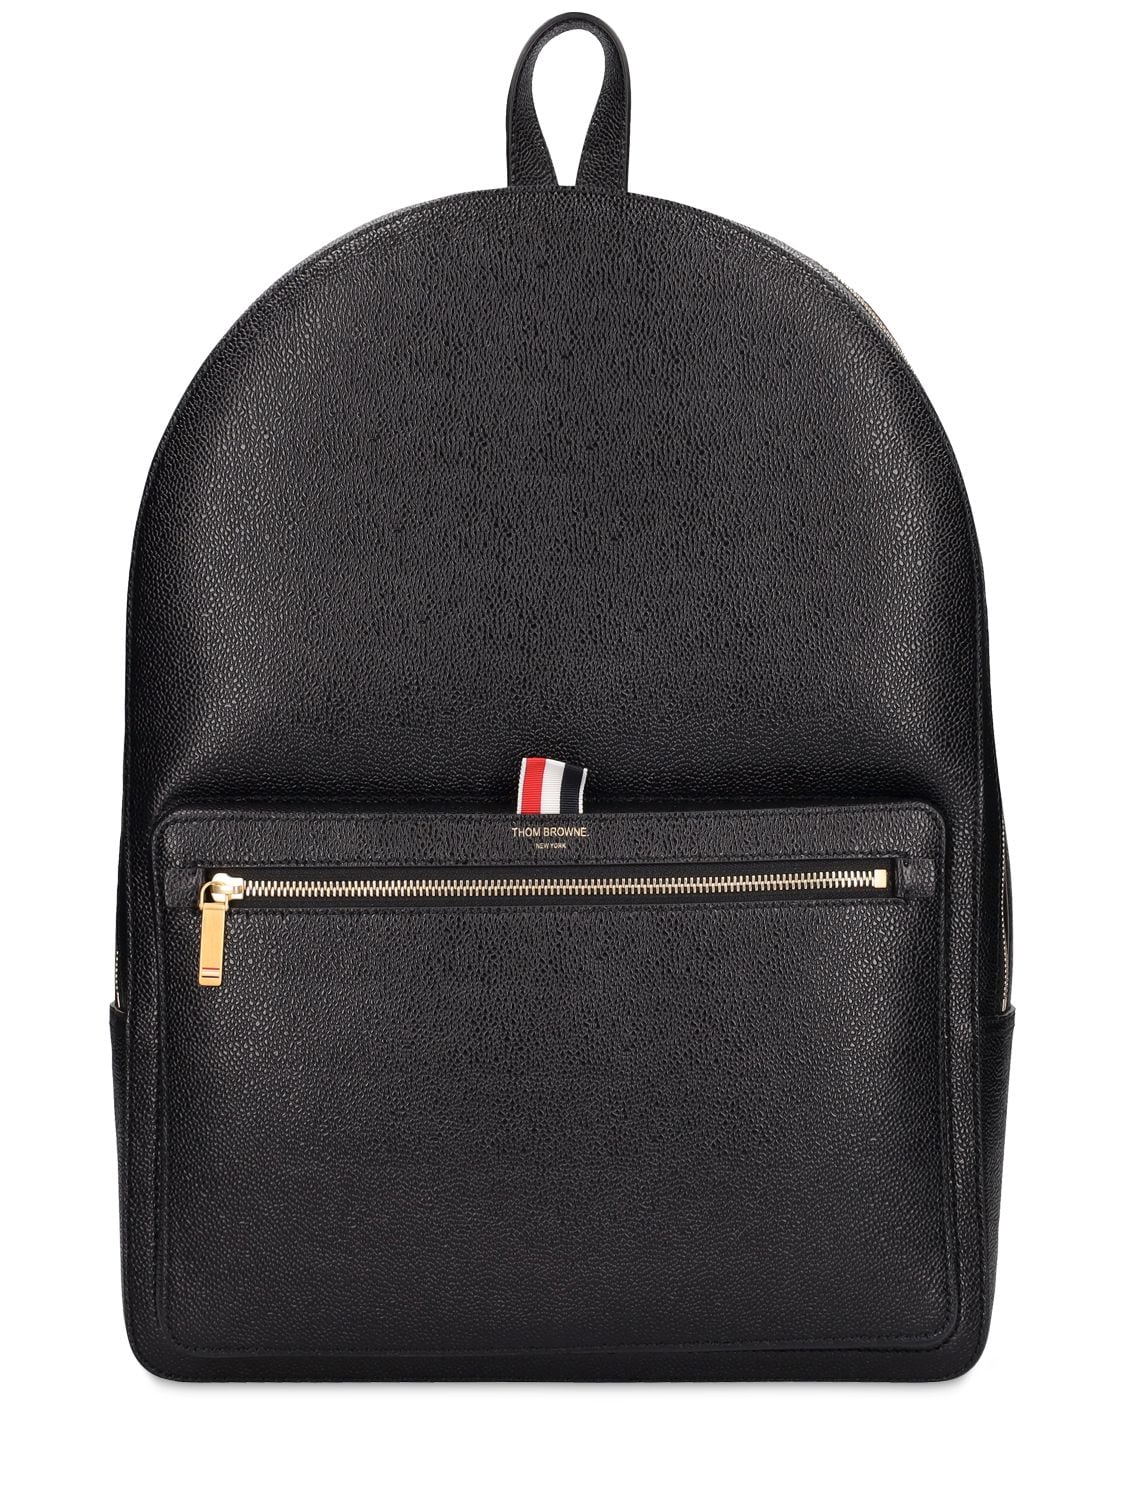 THOM BROWNE GRAINED LEATHER BACKPACK